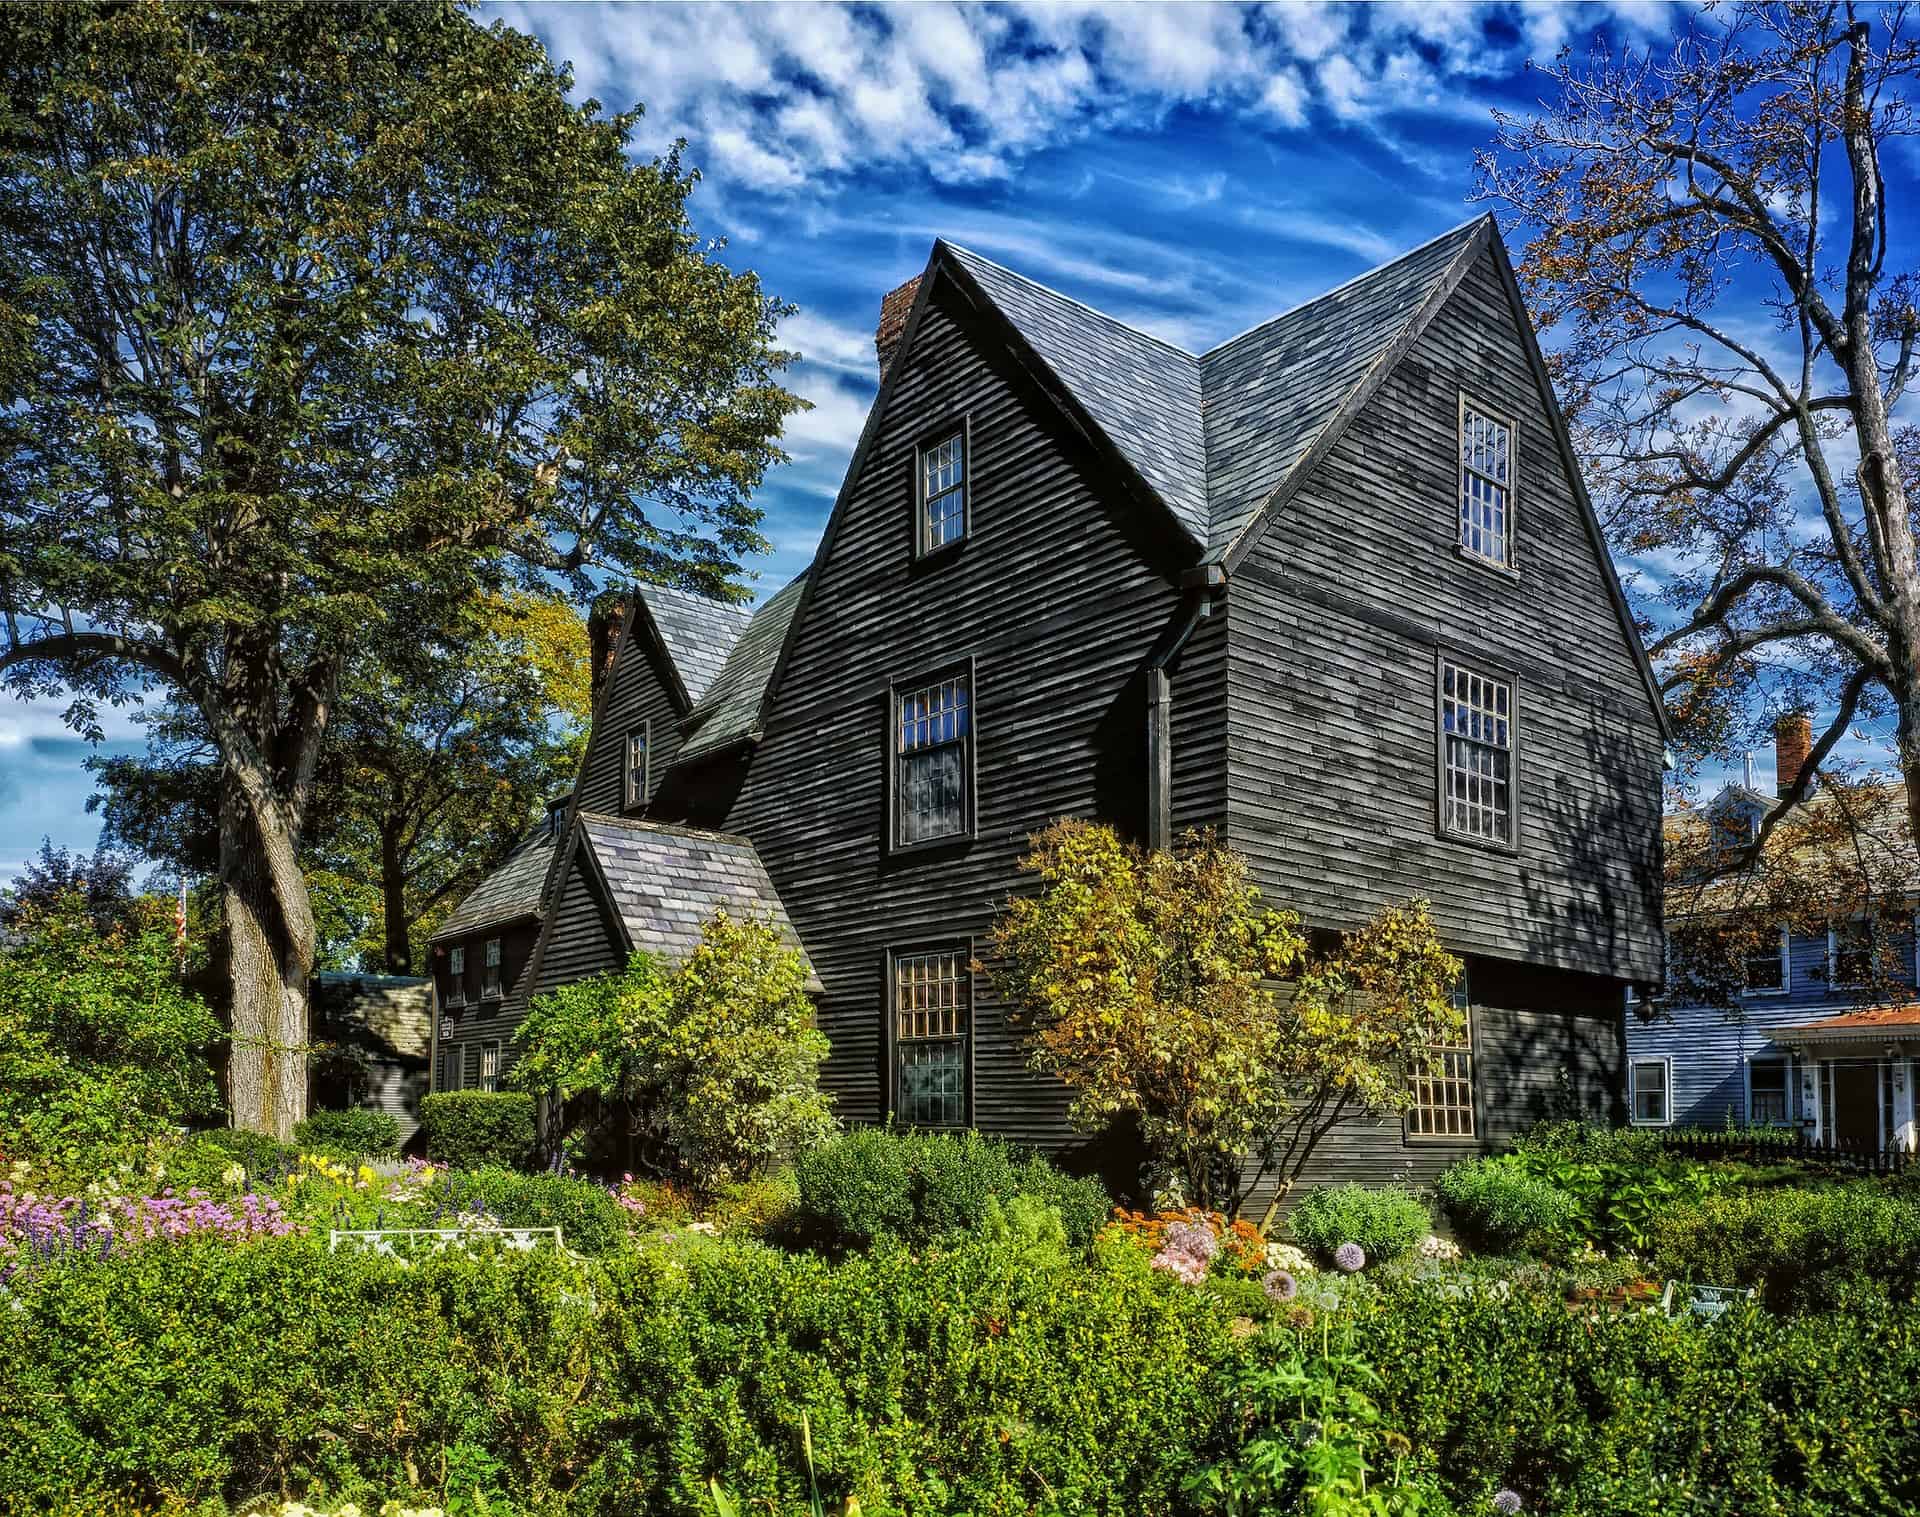 Best things to do in Salem Massachusetts - Kate Wallinga - House of Seven Gables by David Mark on Pixabay